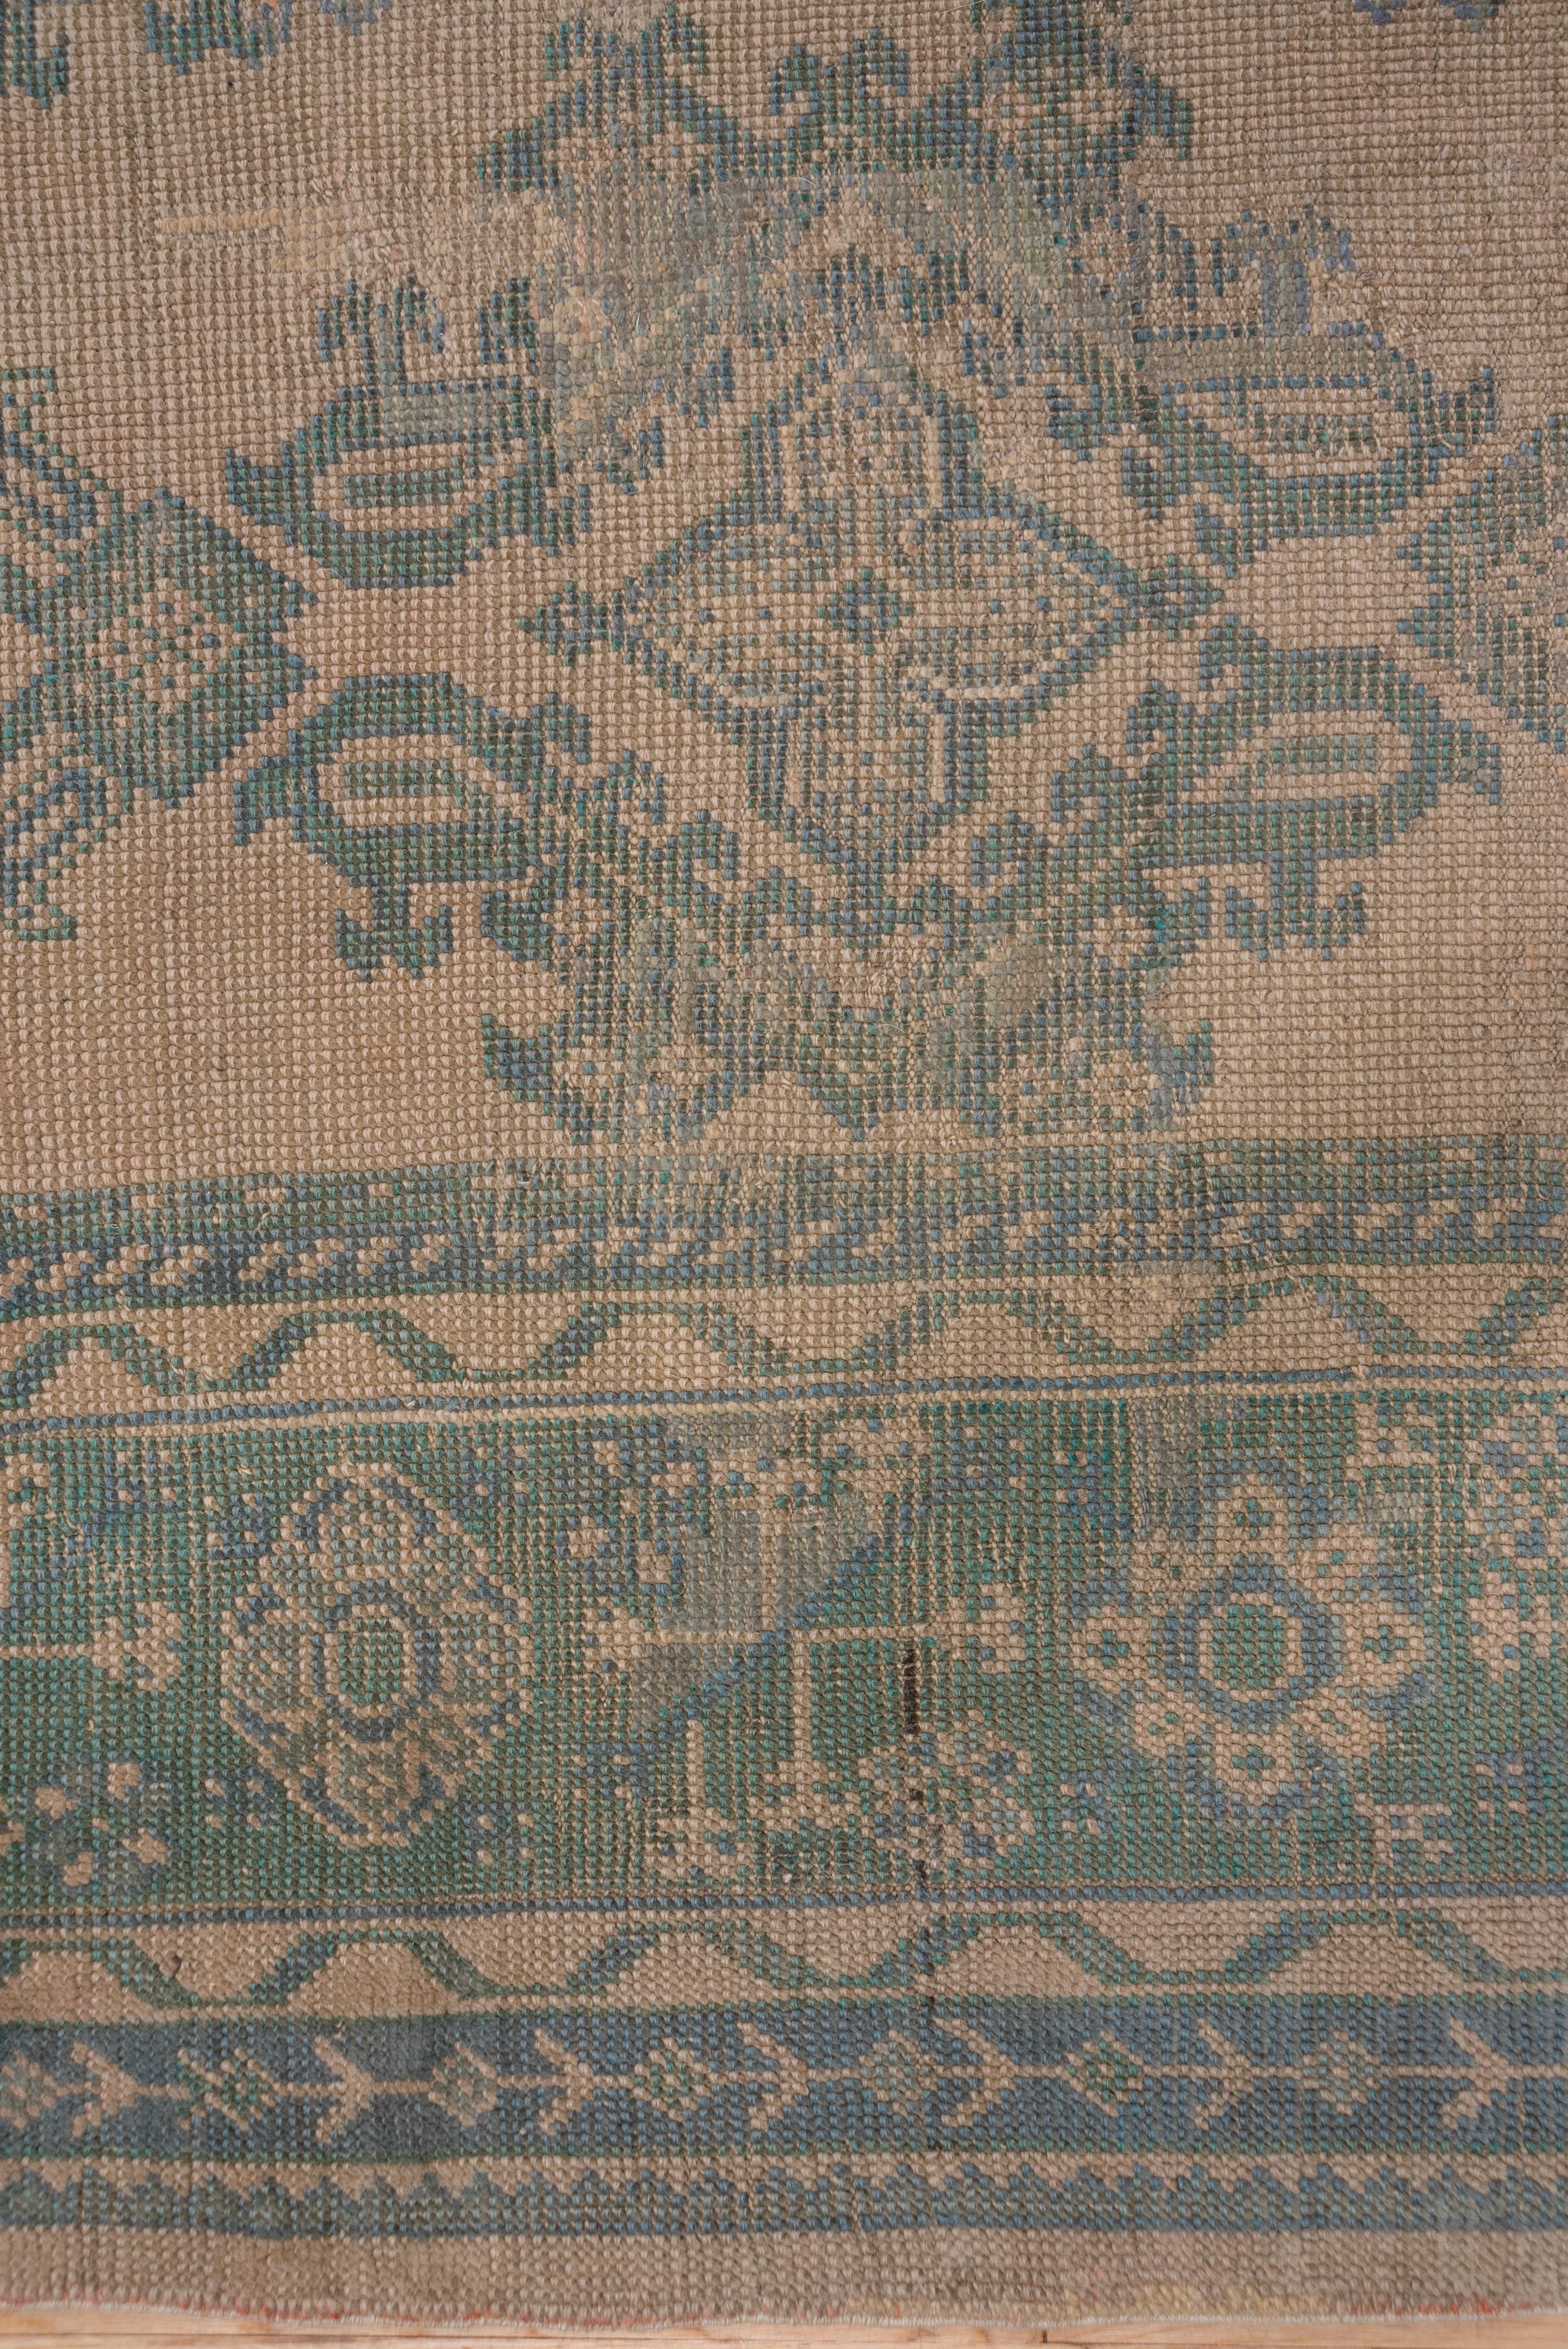 Hand-Knotted Light Brown and Green Antique Oushak Carpet, circa 1920s For Sale